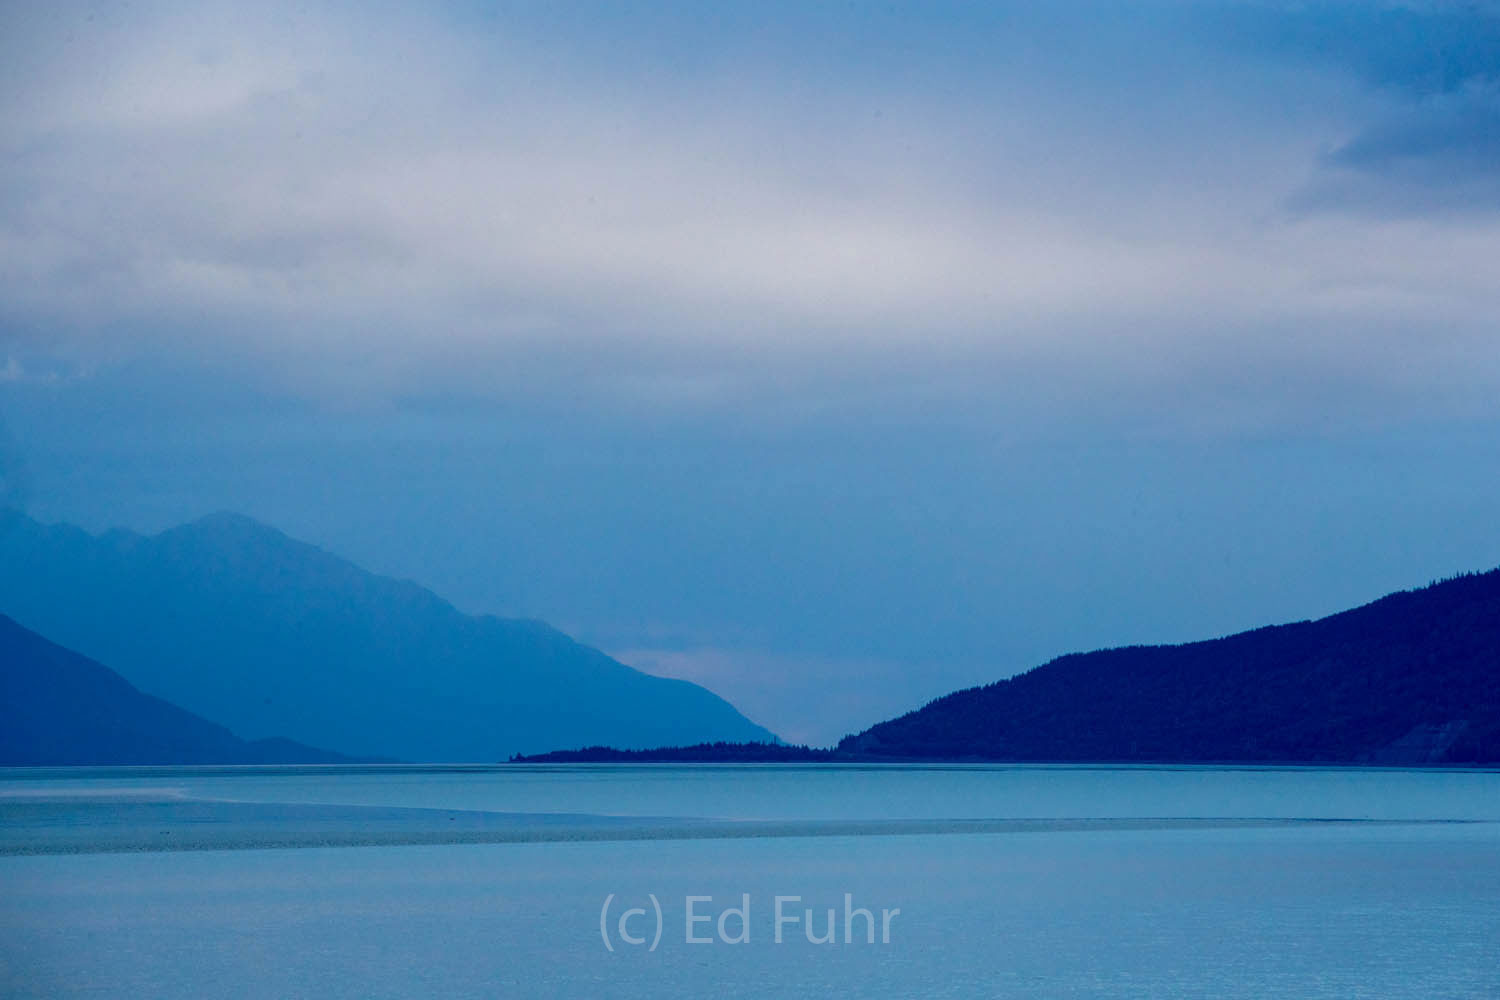 Turnagain Arm is filled with water at dusk.  By early morning the waters will have retreated with the outgoing tide.